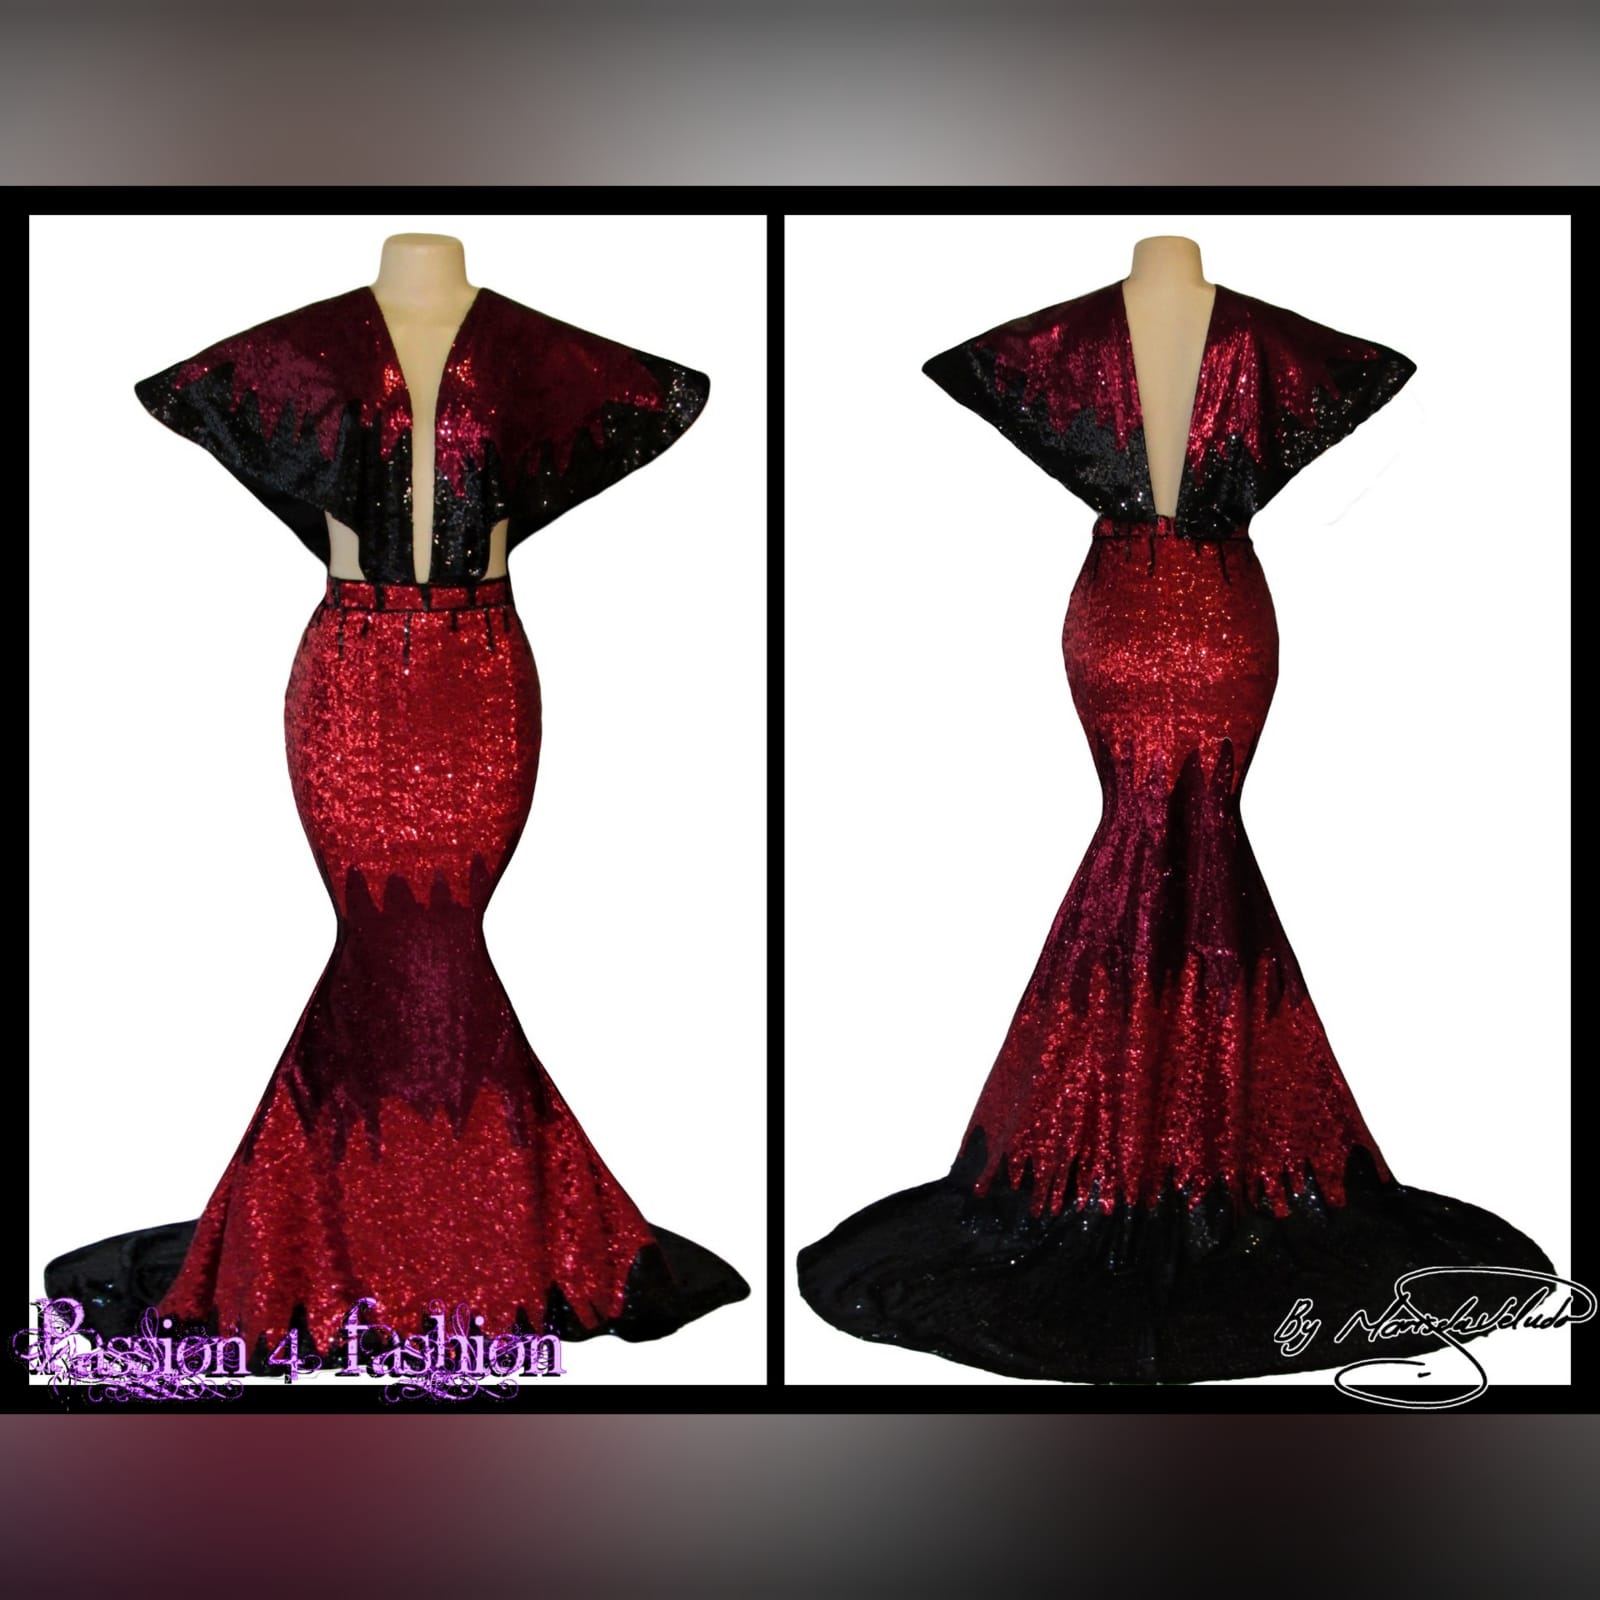 Maroon, burgundy and black sequins prom dress 4 maroon, burgundy and black fully sequined soft mermaid, plunging neckline prom dance dress. With a v open back and wide shoulders creating a short sleeve.